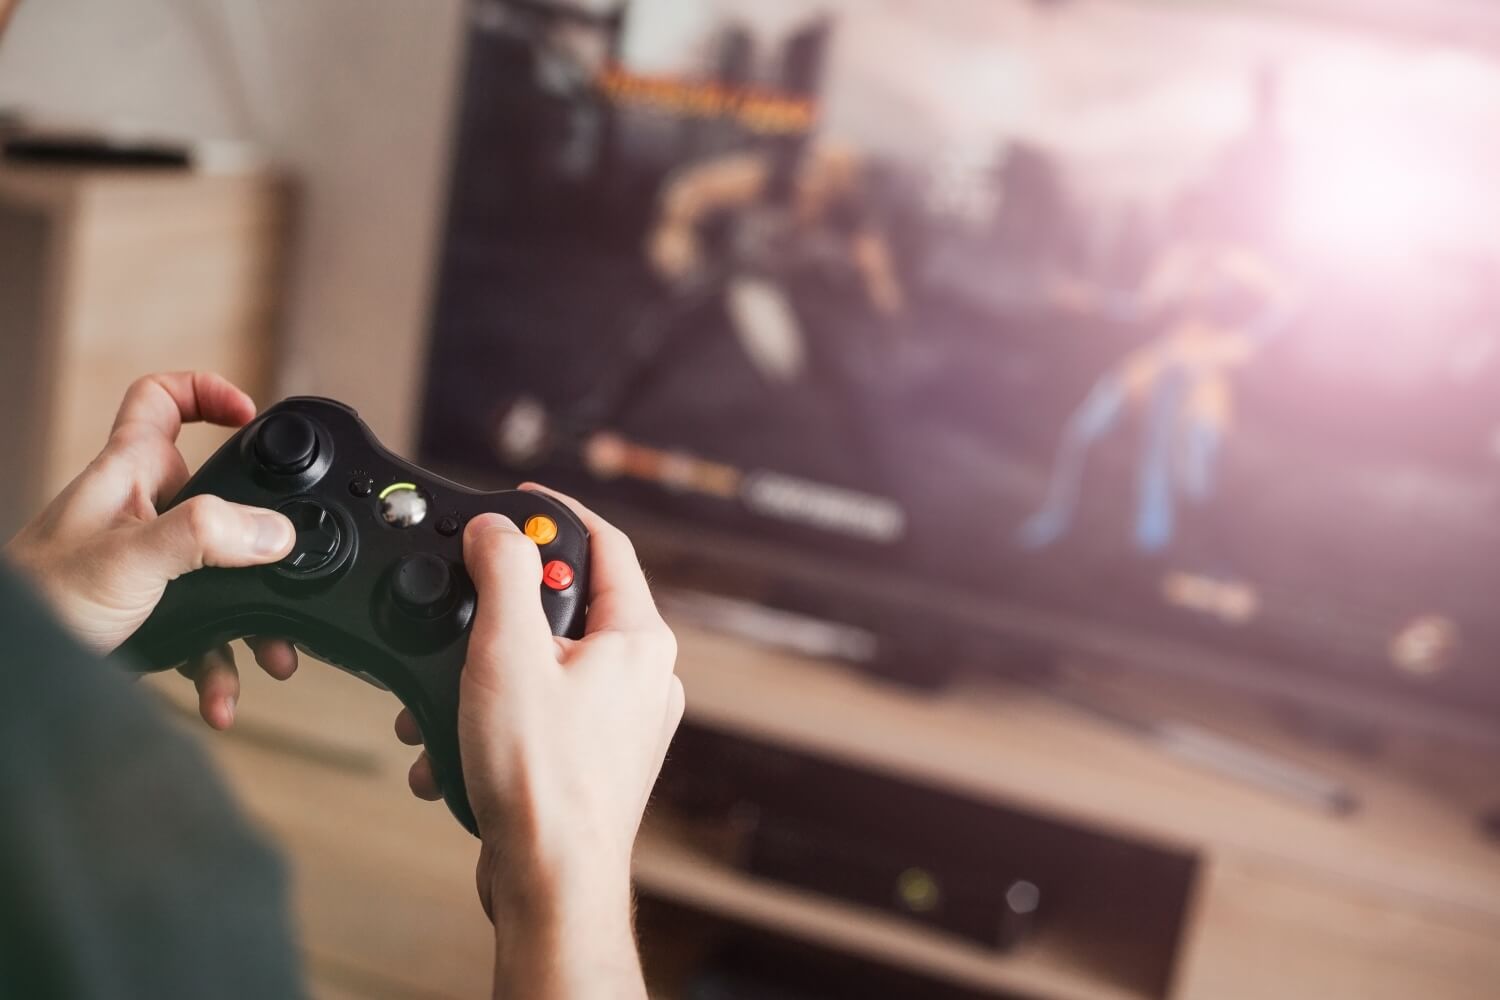 Video game spending reaches record high during pandemic